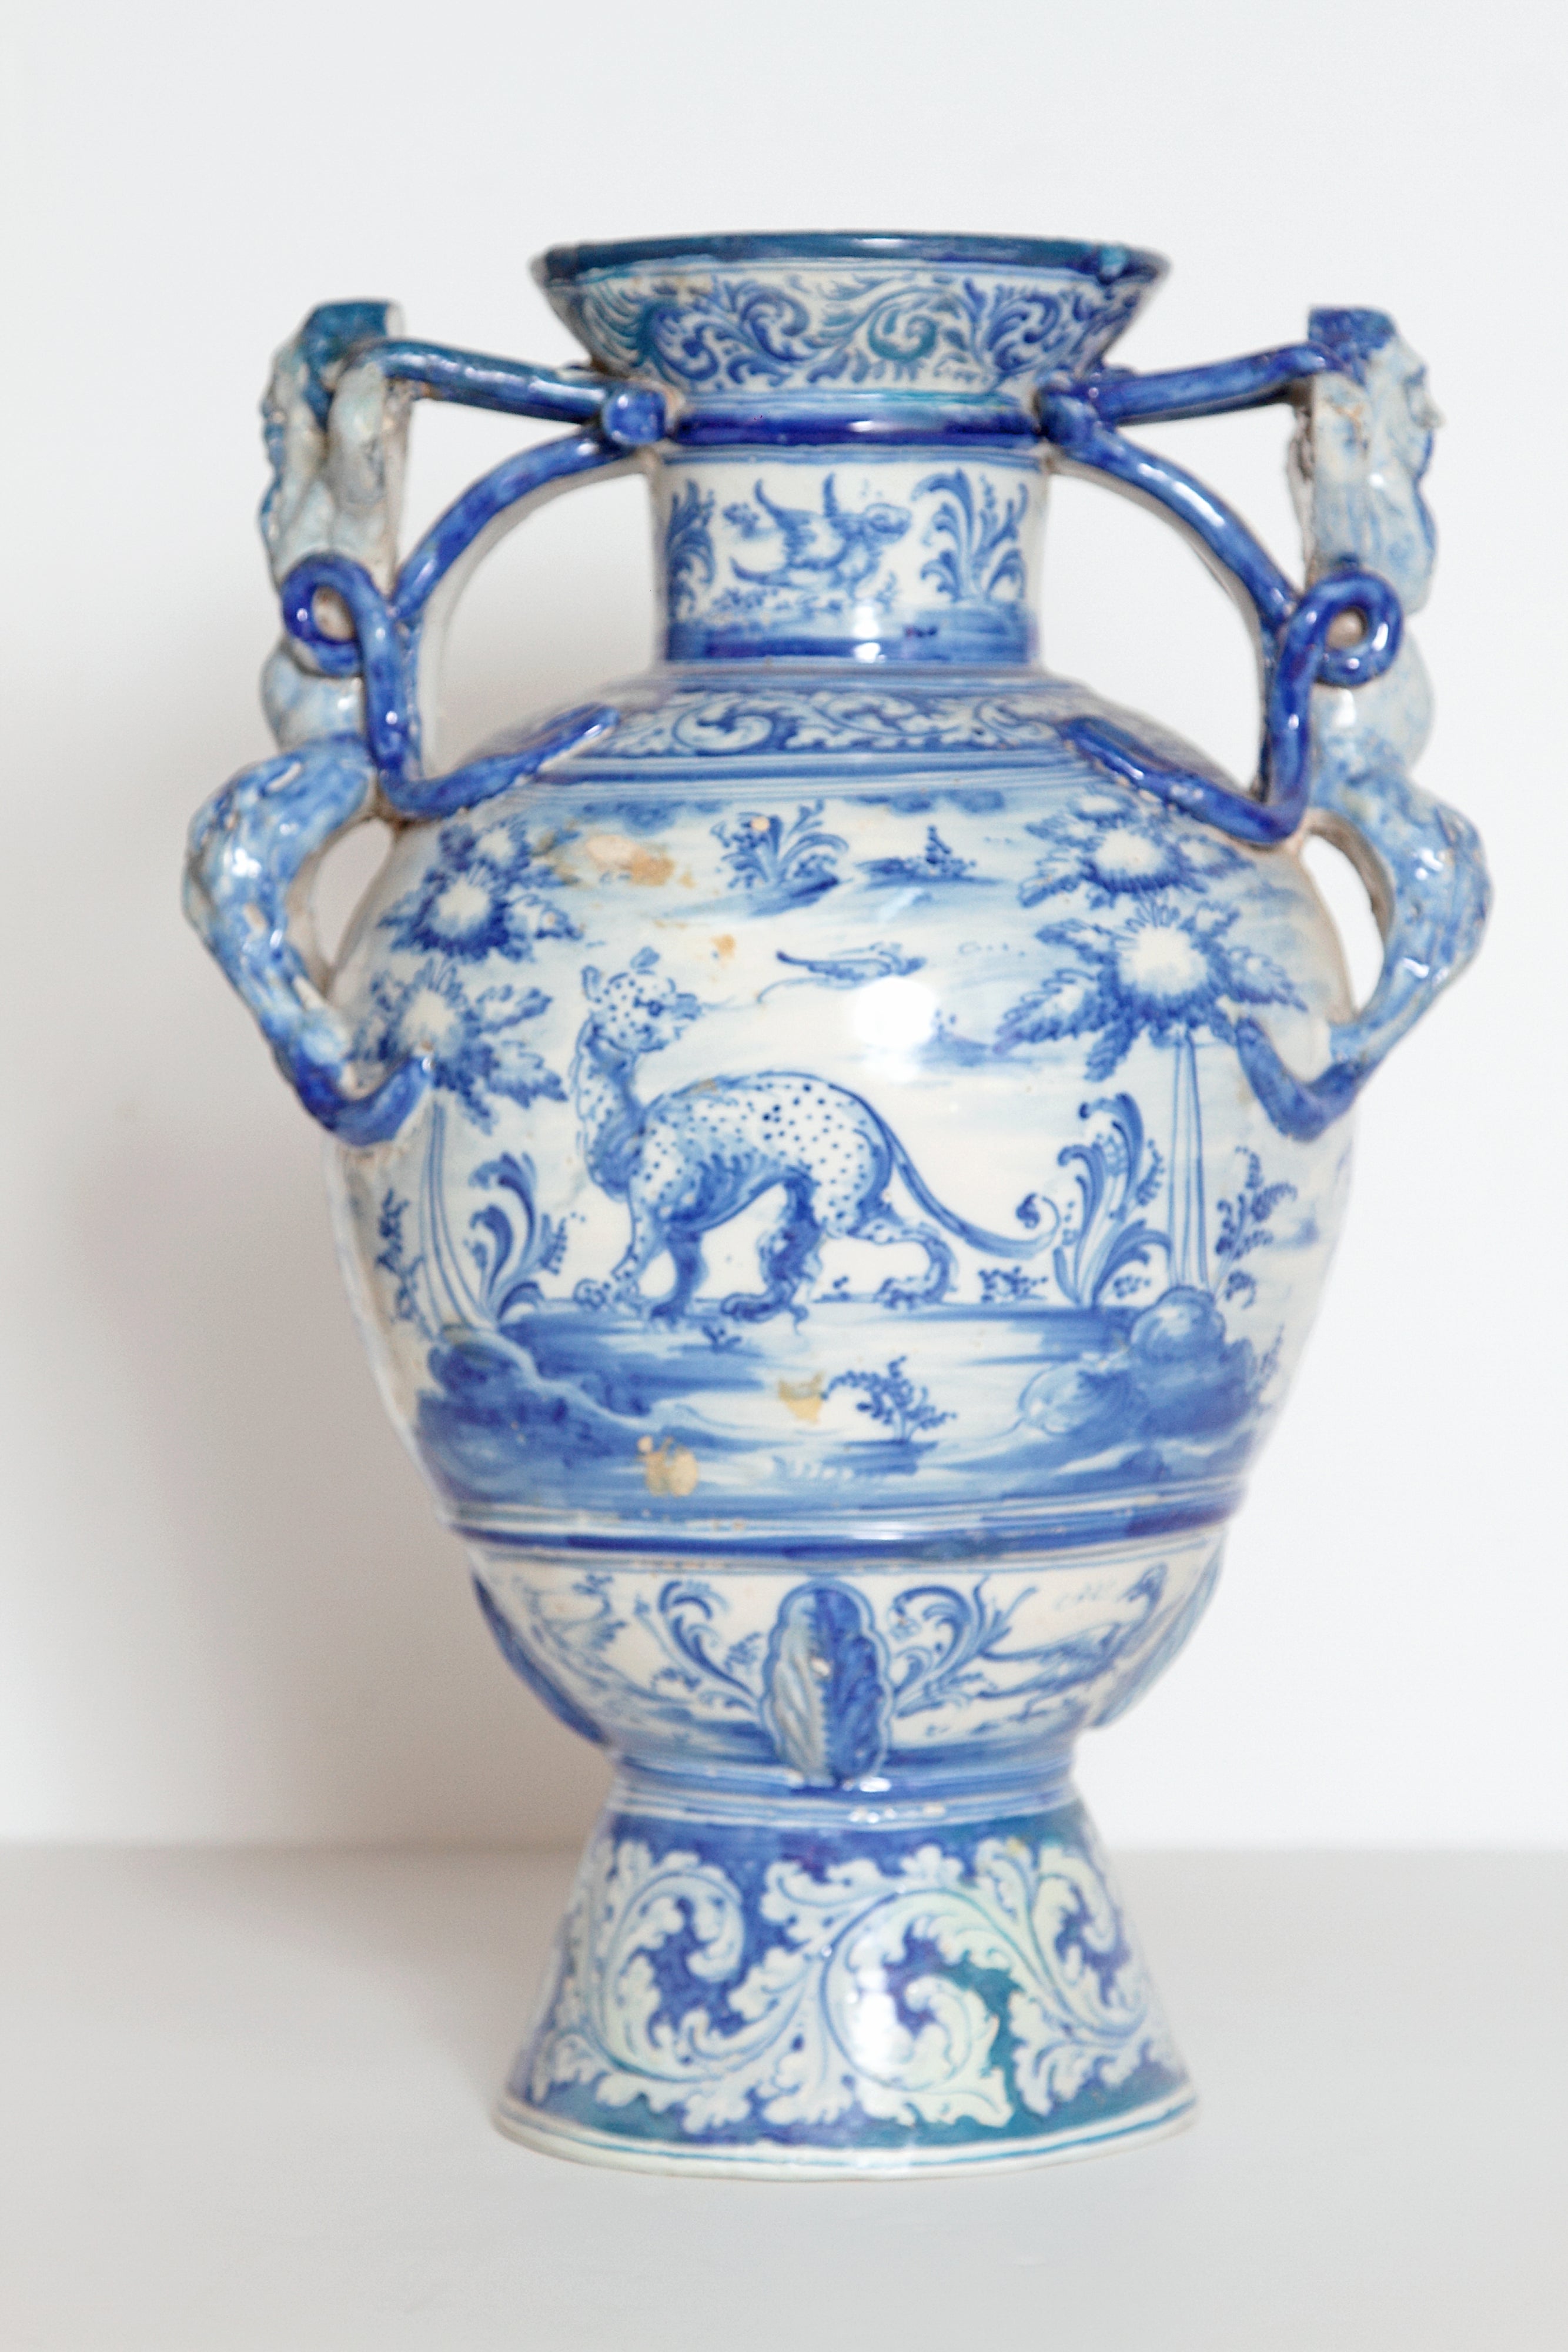 A Large Italian Blue and White Delft-Style Vase